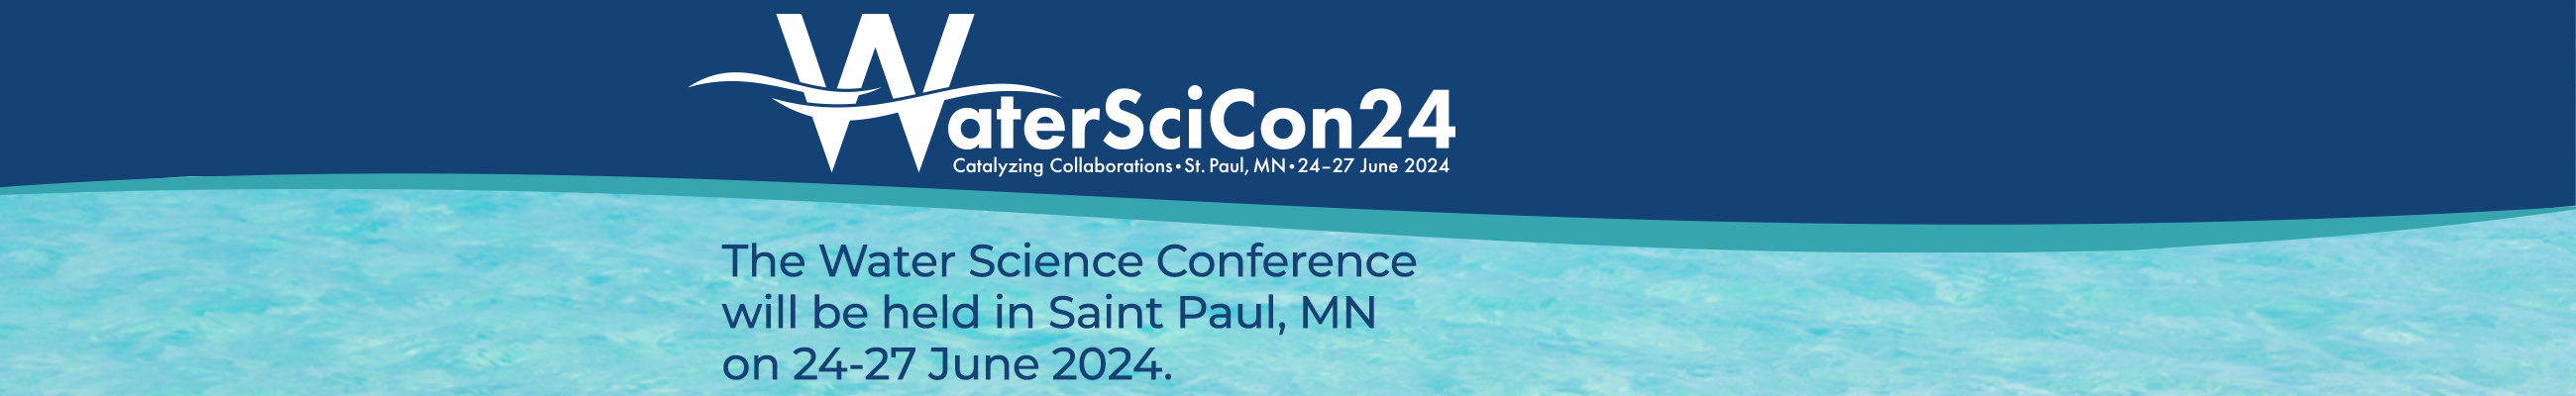 Aerial view of clear sunlit ocean waves with WaterSciCon24 logo and text: The Water Science Conference will be held in Saint Paul, MN on 24-27 June 2024.